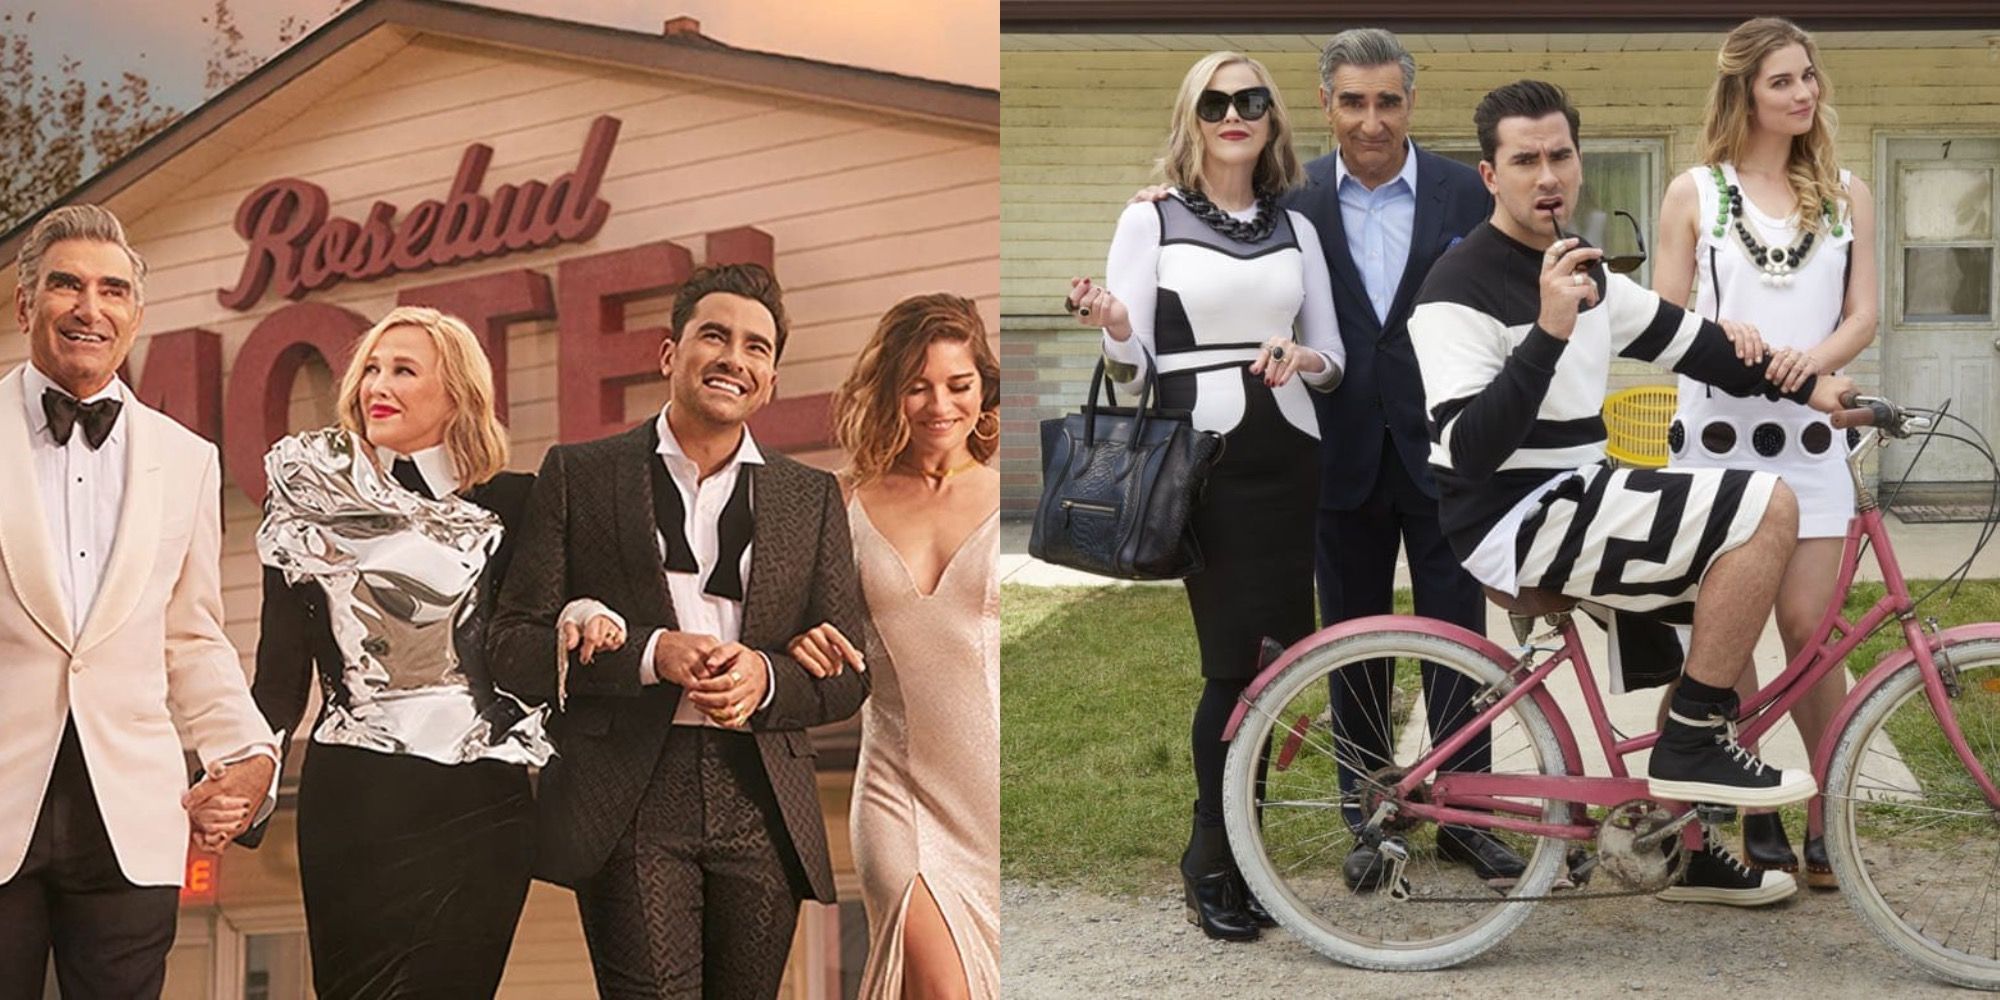 Two pictures of Rose family. One where they are standing in front of Rosebud motel. In another one, all four are posing for a pic. David is sitting on a bicycle